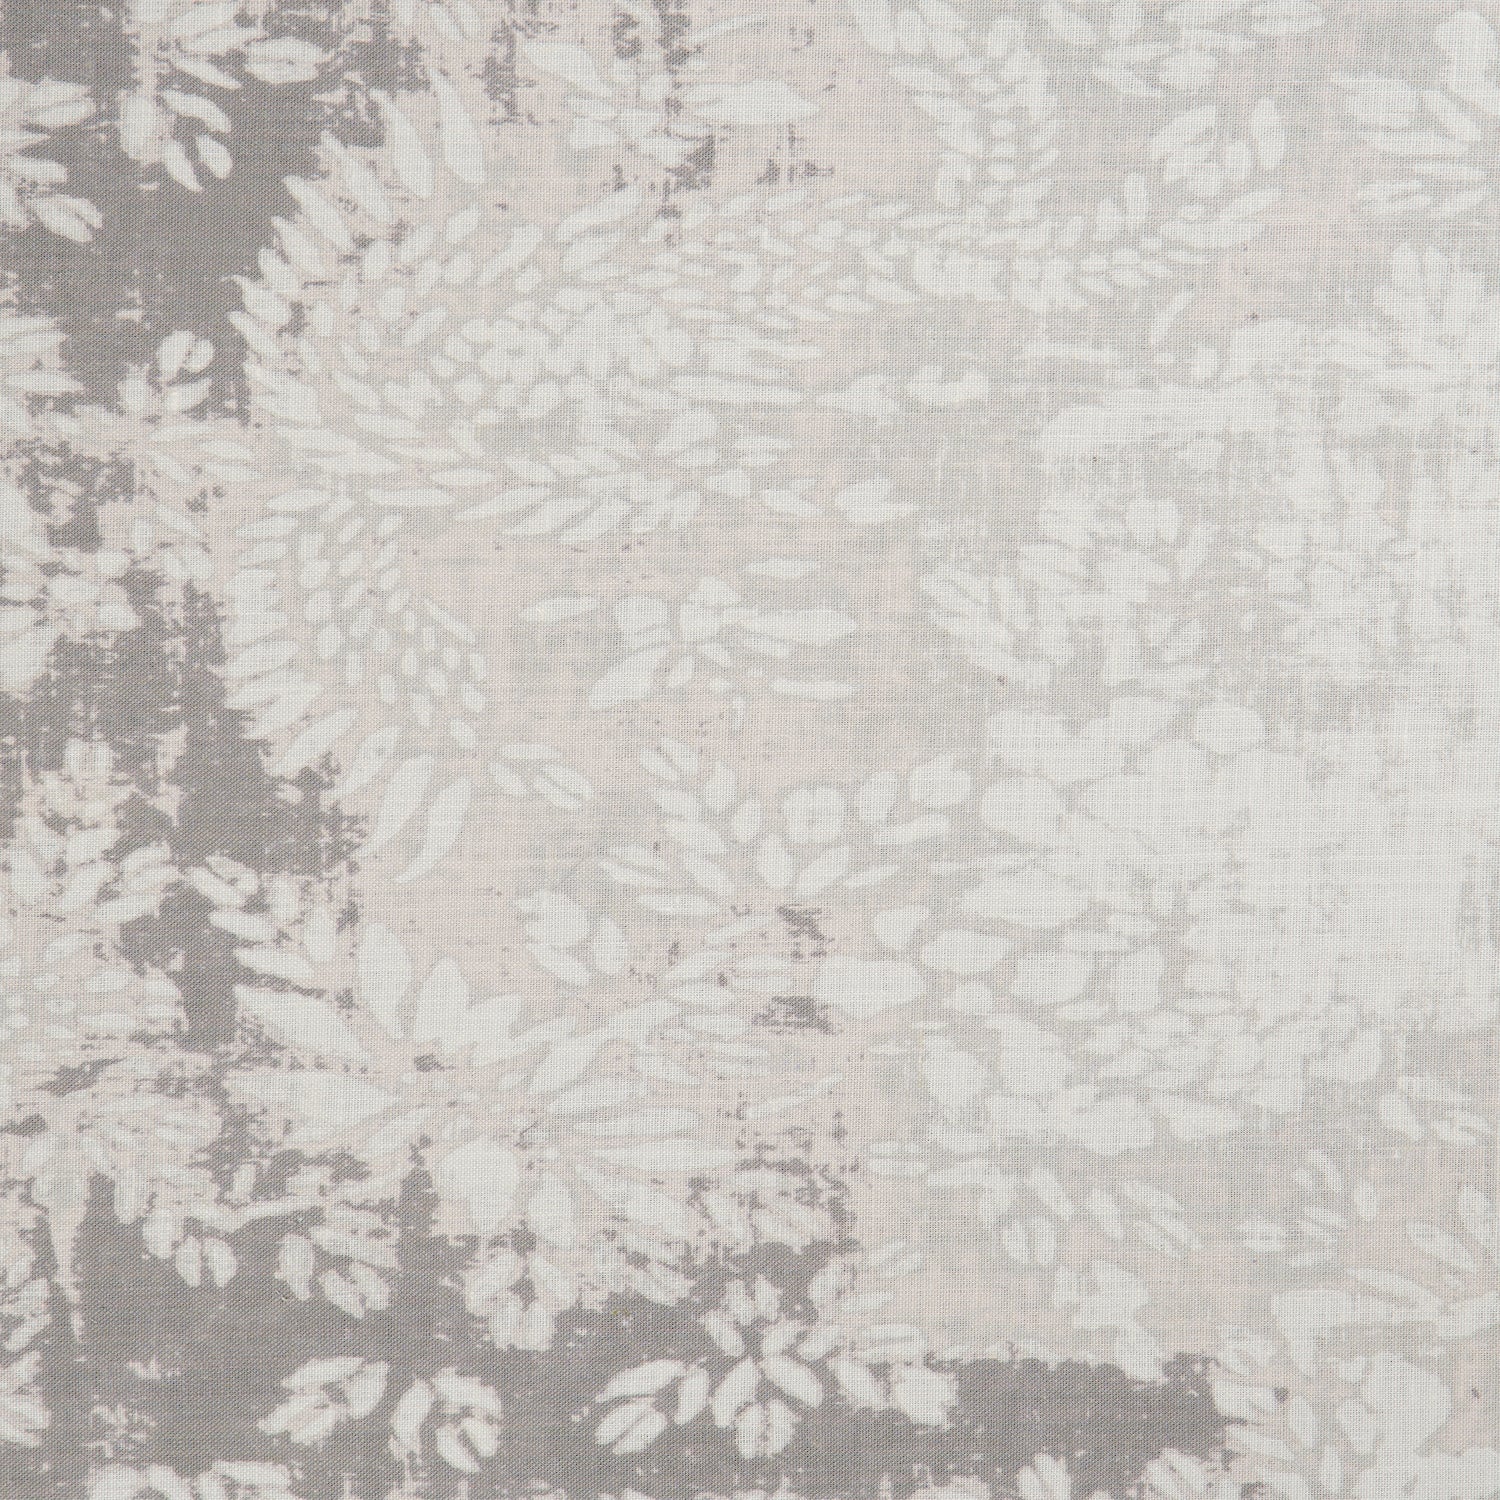 Detail of a linen fabric in a floral and leaf pattern in white on a mottled beige and gray field.